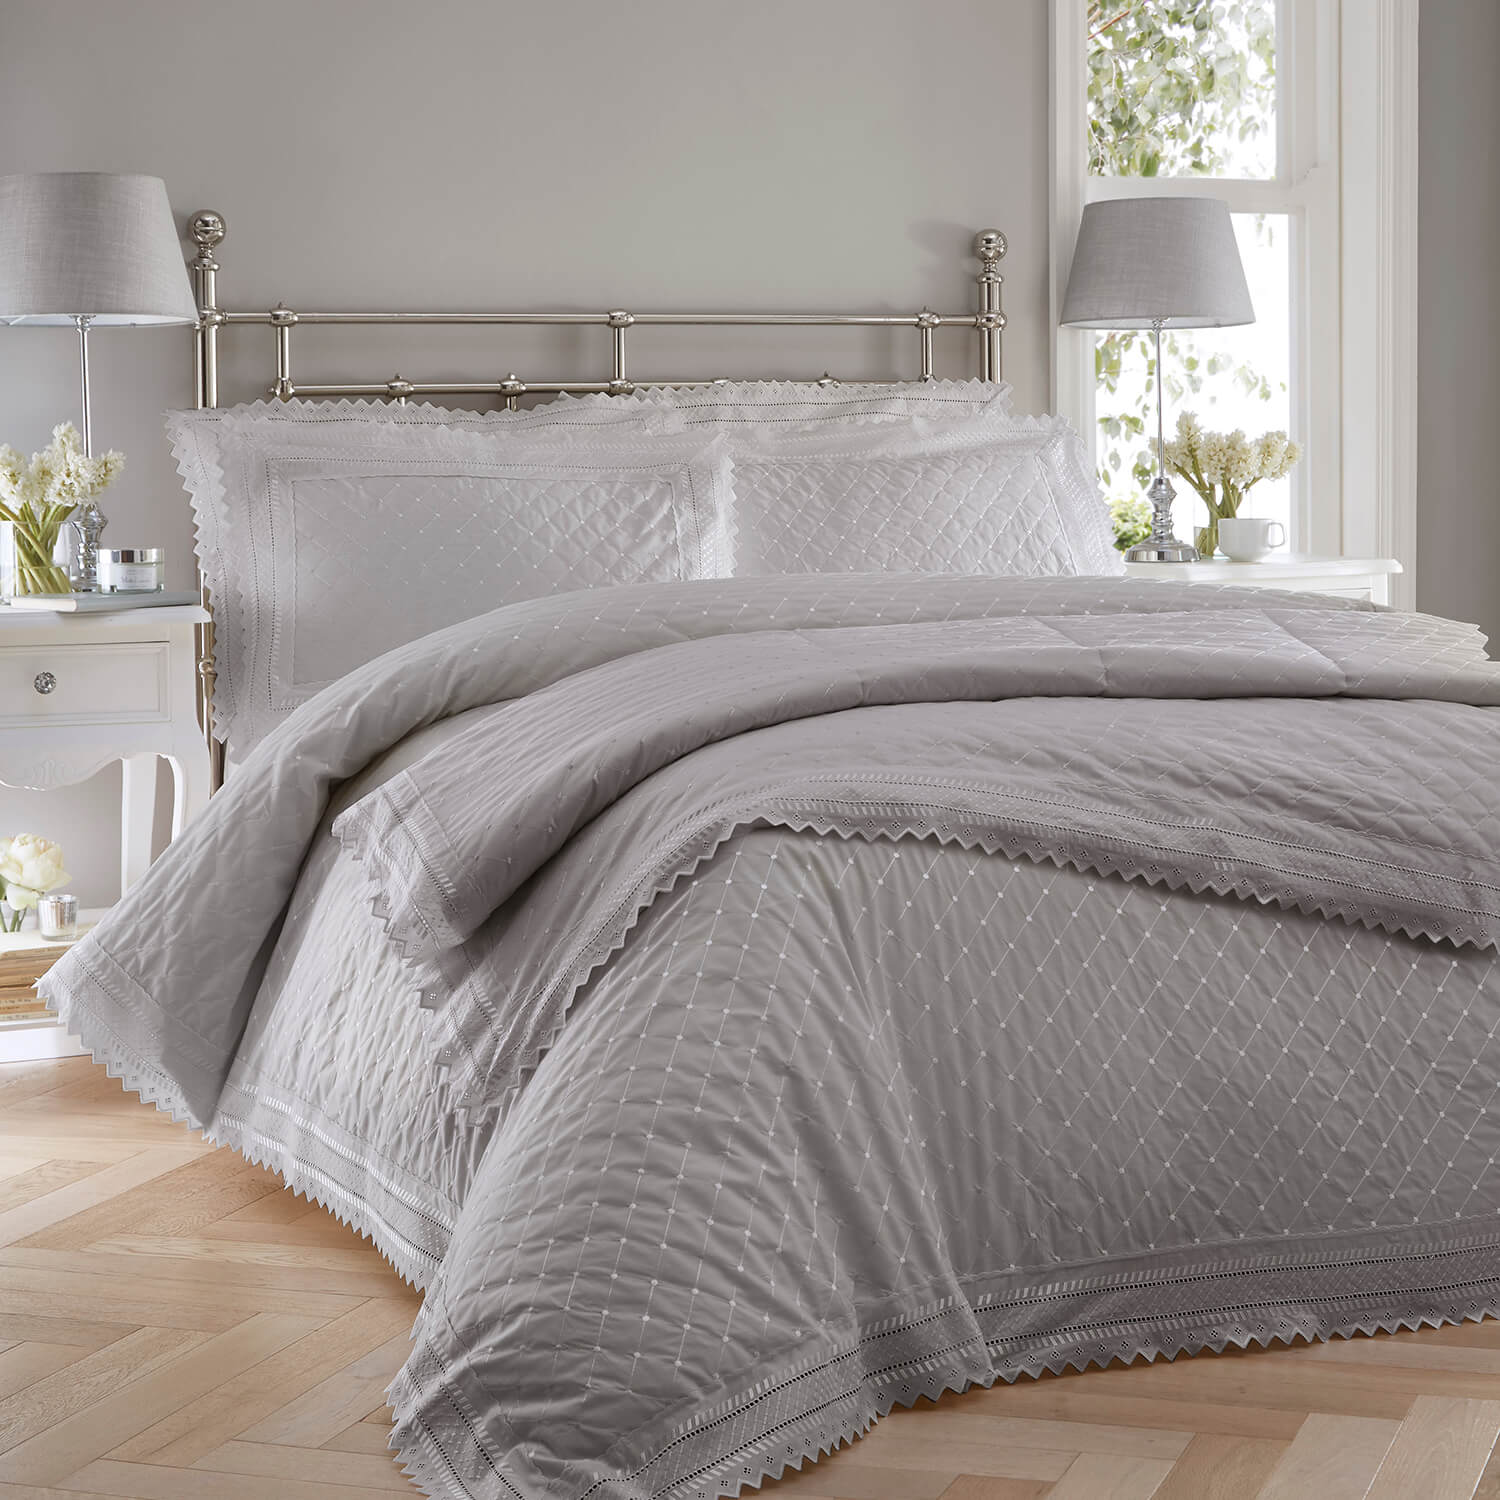 The Home Bedroom Balmoral Bedspread - Silver / Grey 1 Shaws Department Stores